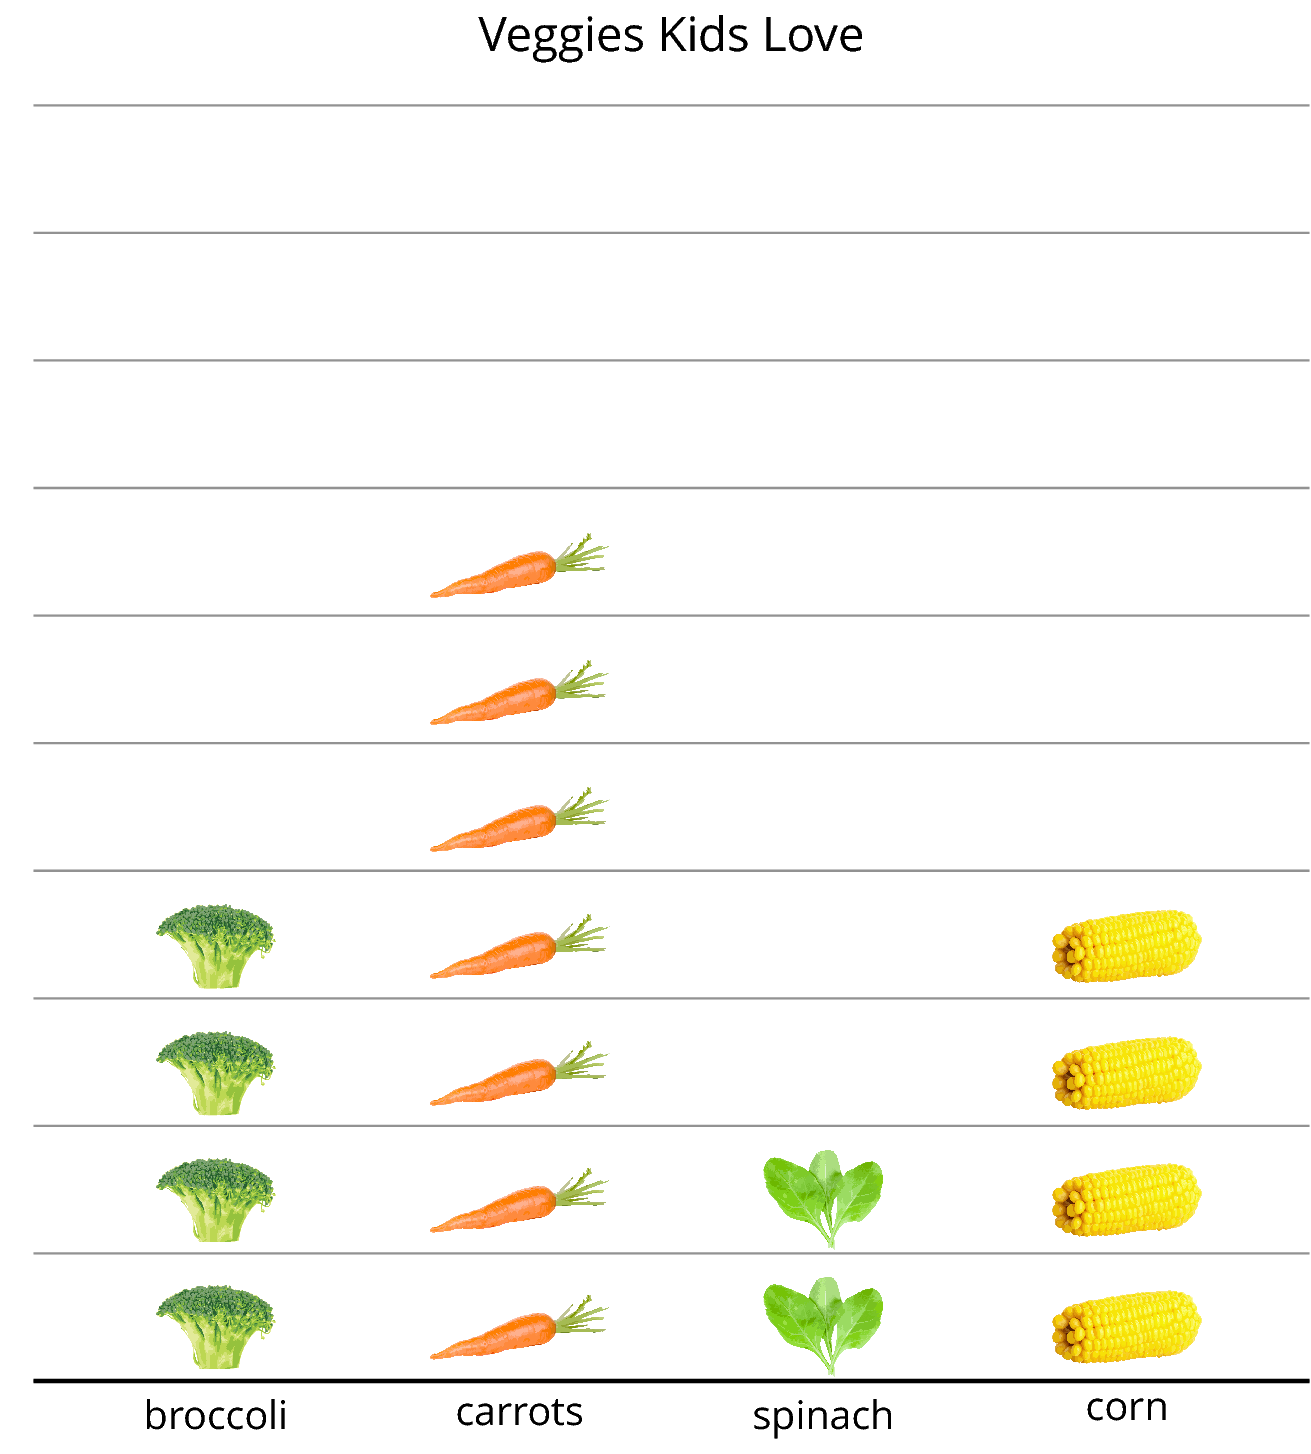 Picture Graph.  Veggies Kids Love. Key; each vegetable picture represents one kid response. Broccoli, 4 broccoli pictures. Carrot, 7 carrot pictures. Spinach, 2 spinach pictures. Corn, 4 corn pictures.